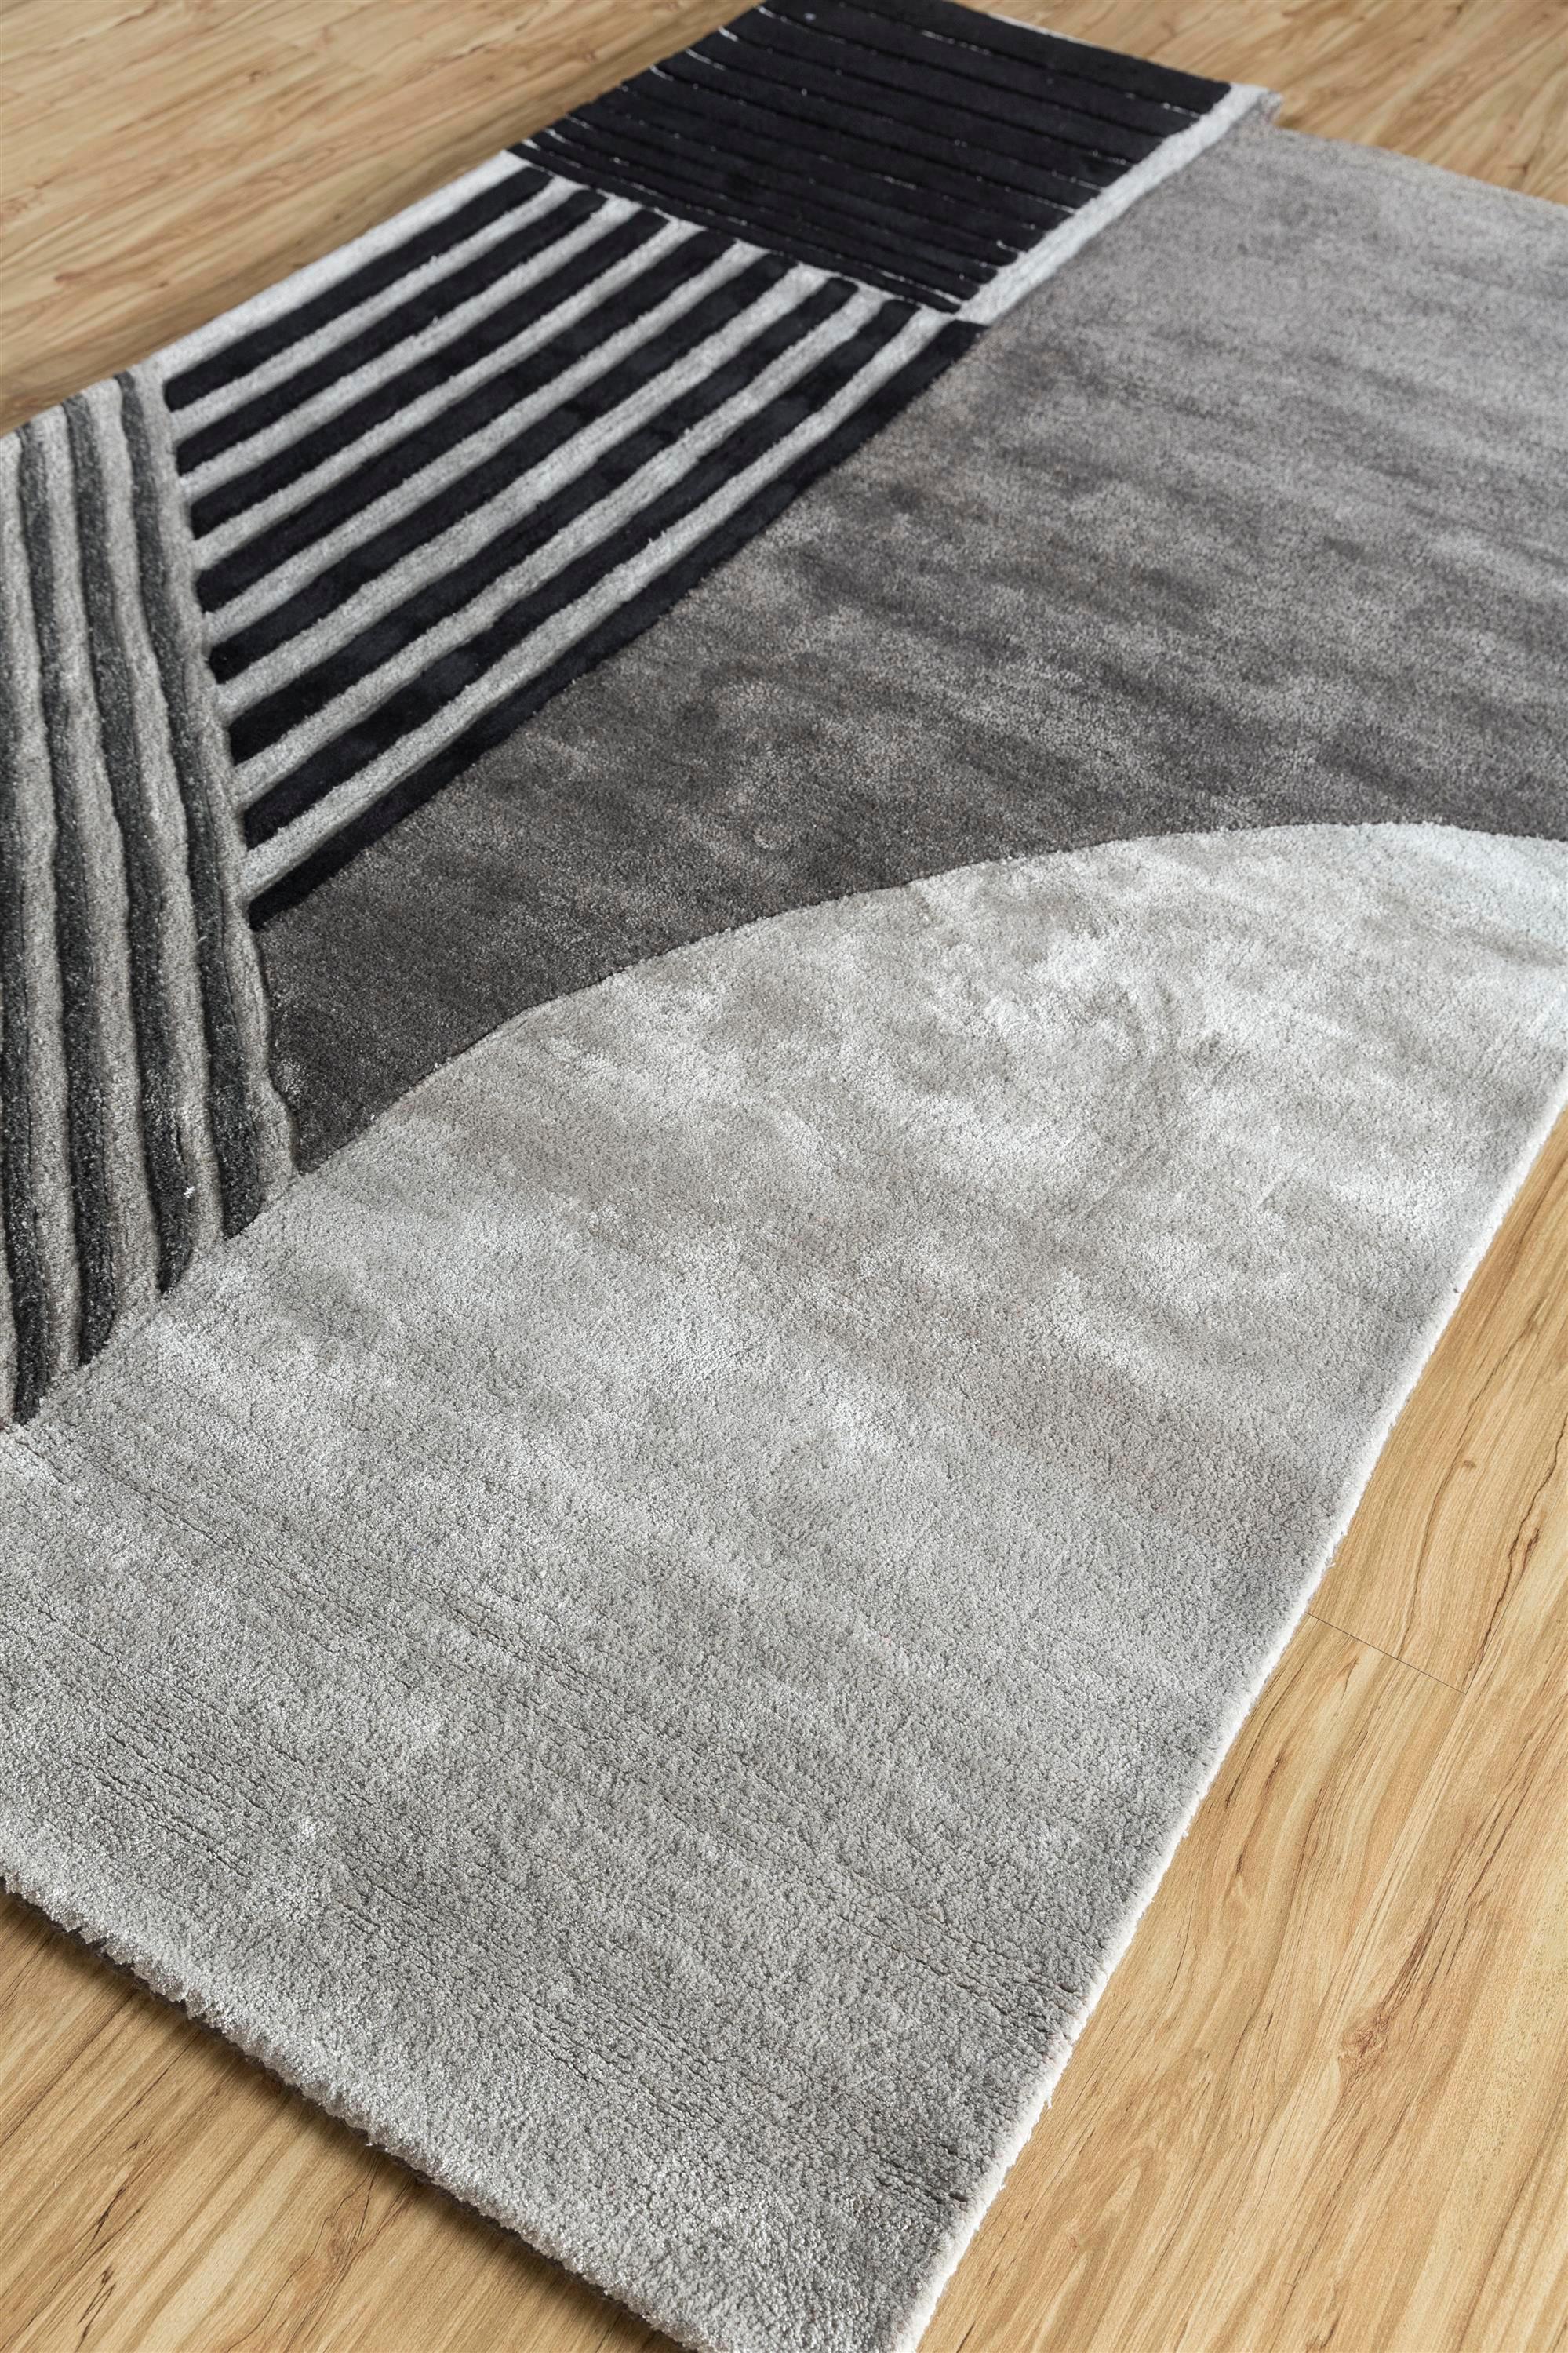 Have you ever wondered how art meets functionality? Dive into the realm of modern design with our Hand Tufted rug, skillfully handmade in rural India. This playful masterpiece unfolds like origami, a captivating fusion of soft geometry and joyful